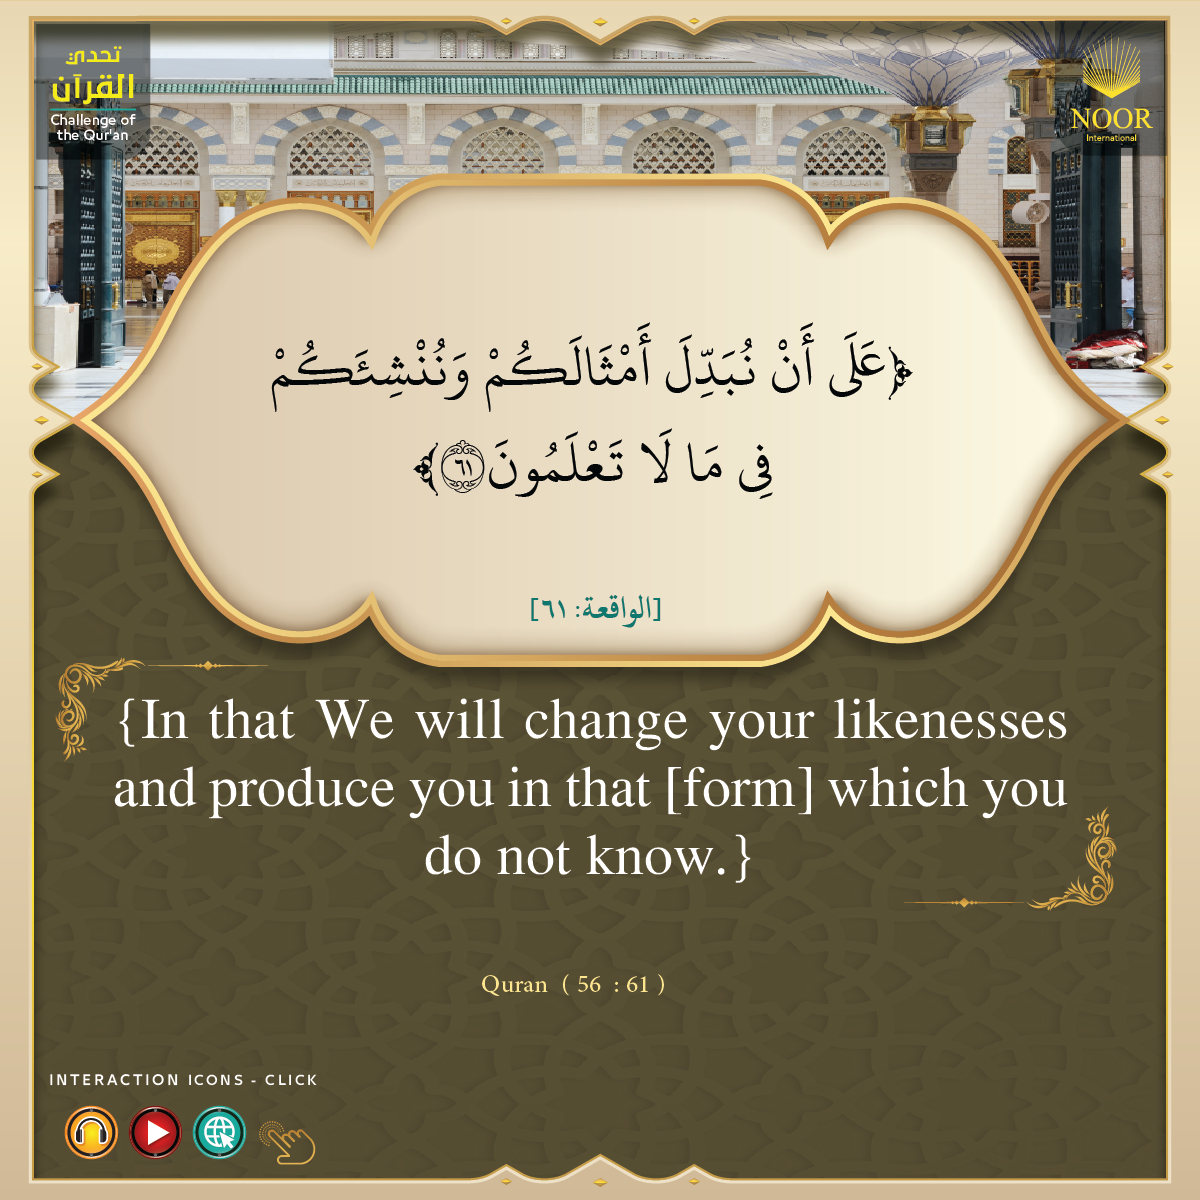 "In that We will change your likenesses and produce you in that..."